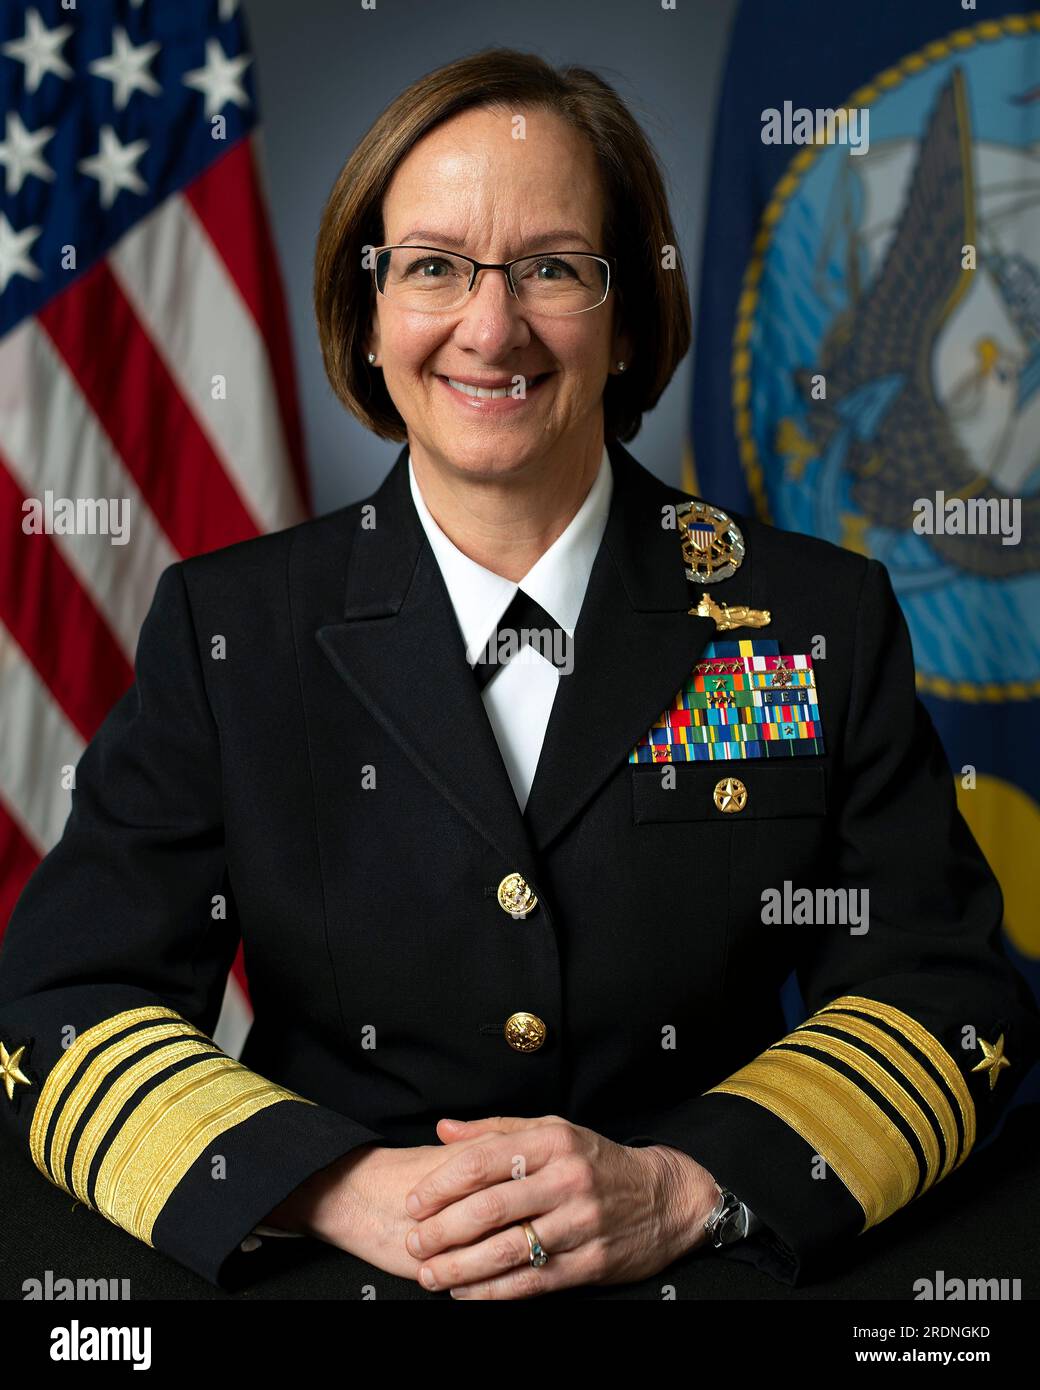 Washington, United States. 03 March, 2023. U.S. Vice Chief Naval Operations Adm. Lisa Franchetti official portrait in her dress uniform at the Pentagon, March 3, 2023 in Washington, D.C. President Joe Biden has nominated Franchetti to lead the Navy, as the first woman to be a U.S. military service chief.  Credit: JoAnne Sorrentino/US Navy/Alamy Live News Stock Photo